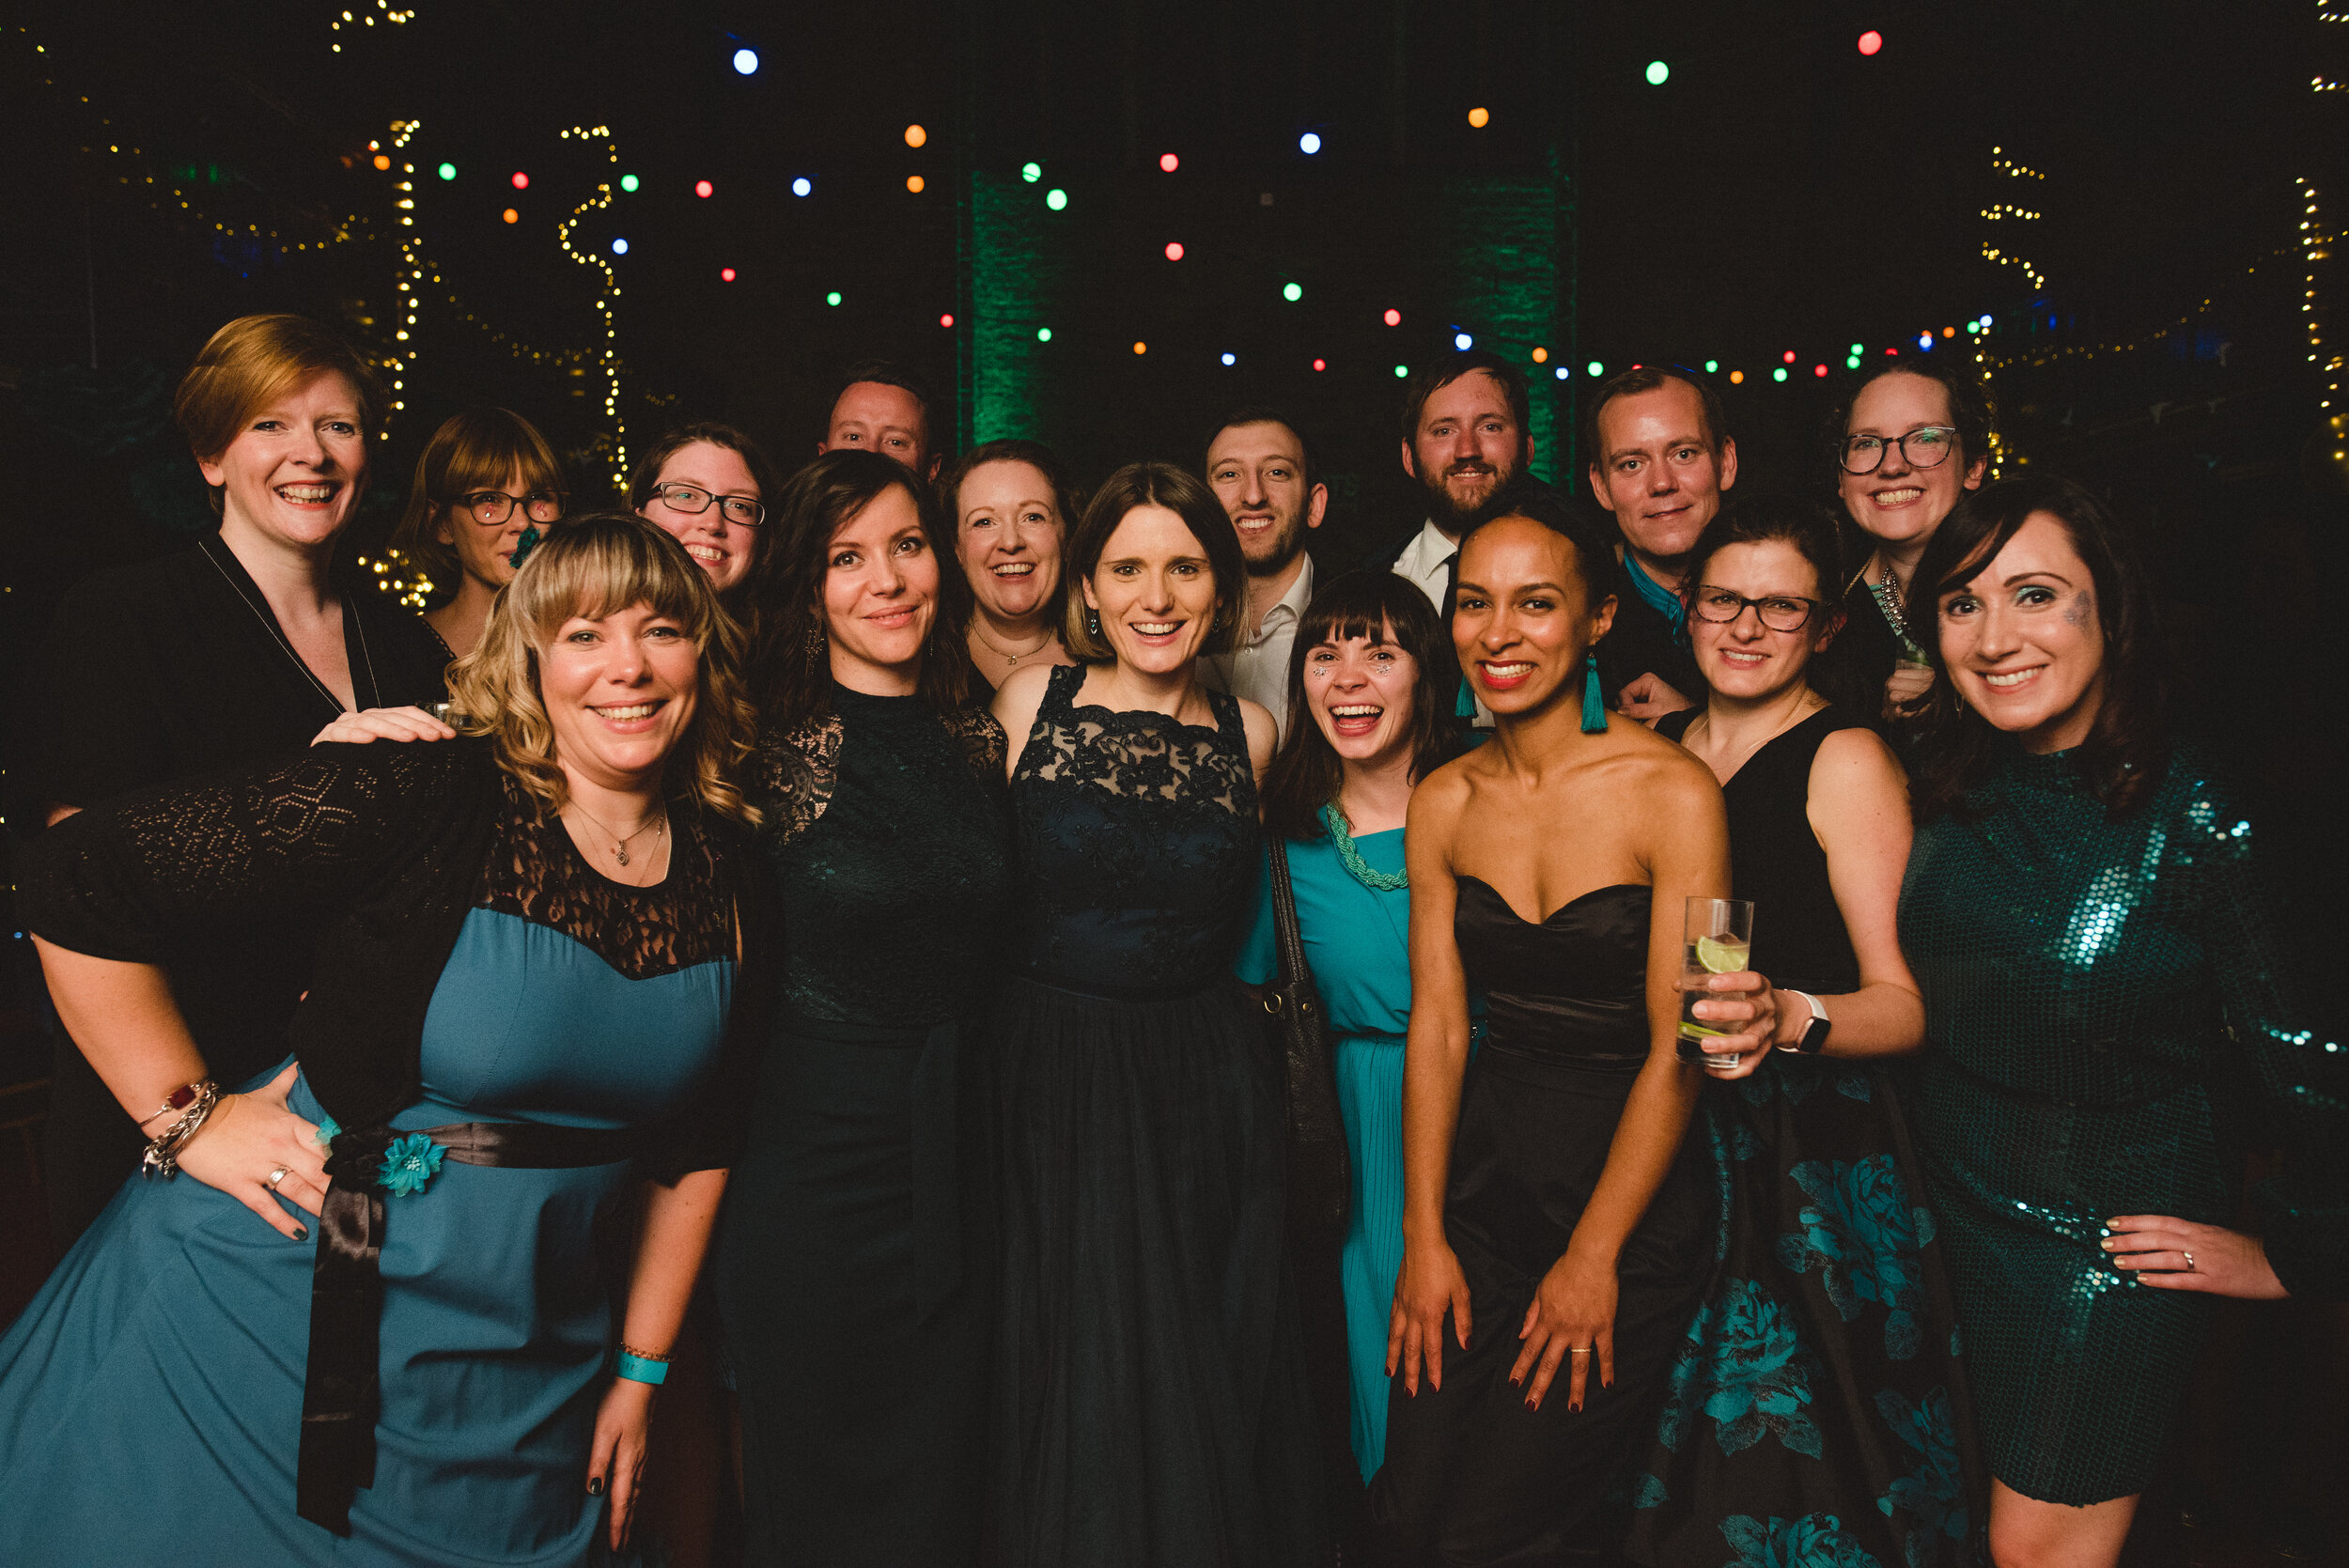 Starling Arts community choir members at the Black and Teal Ball. Photo by Alice the Camera